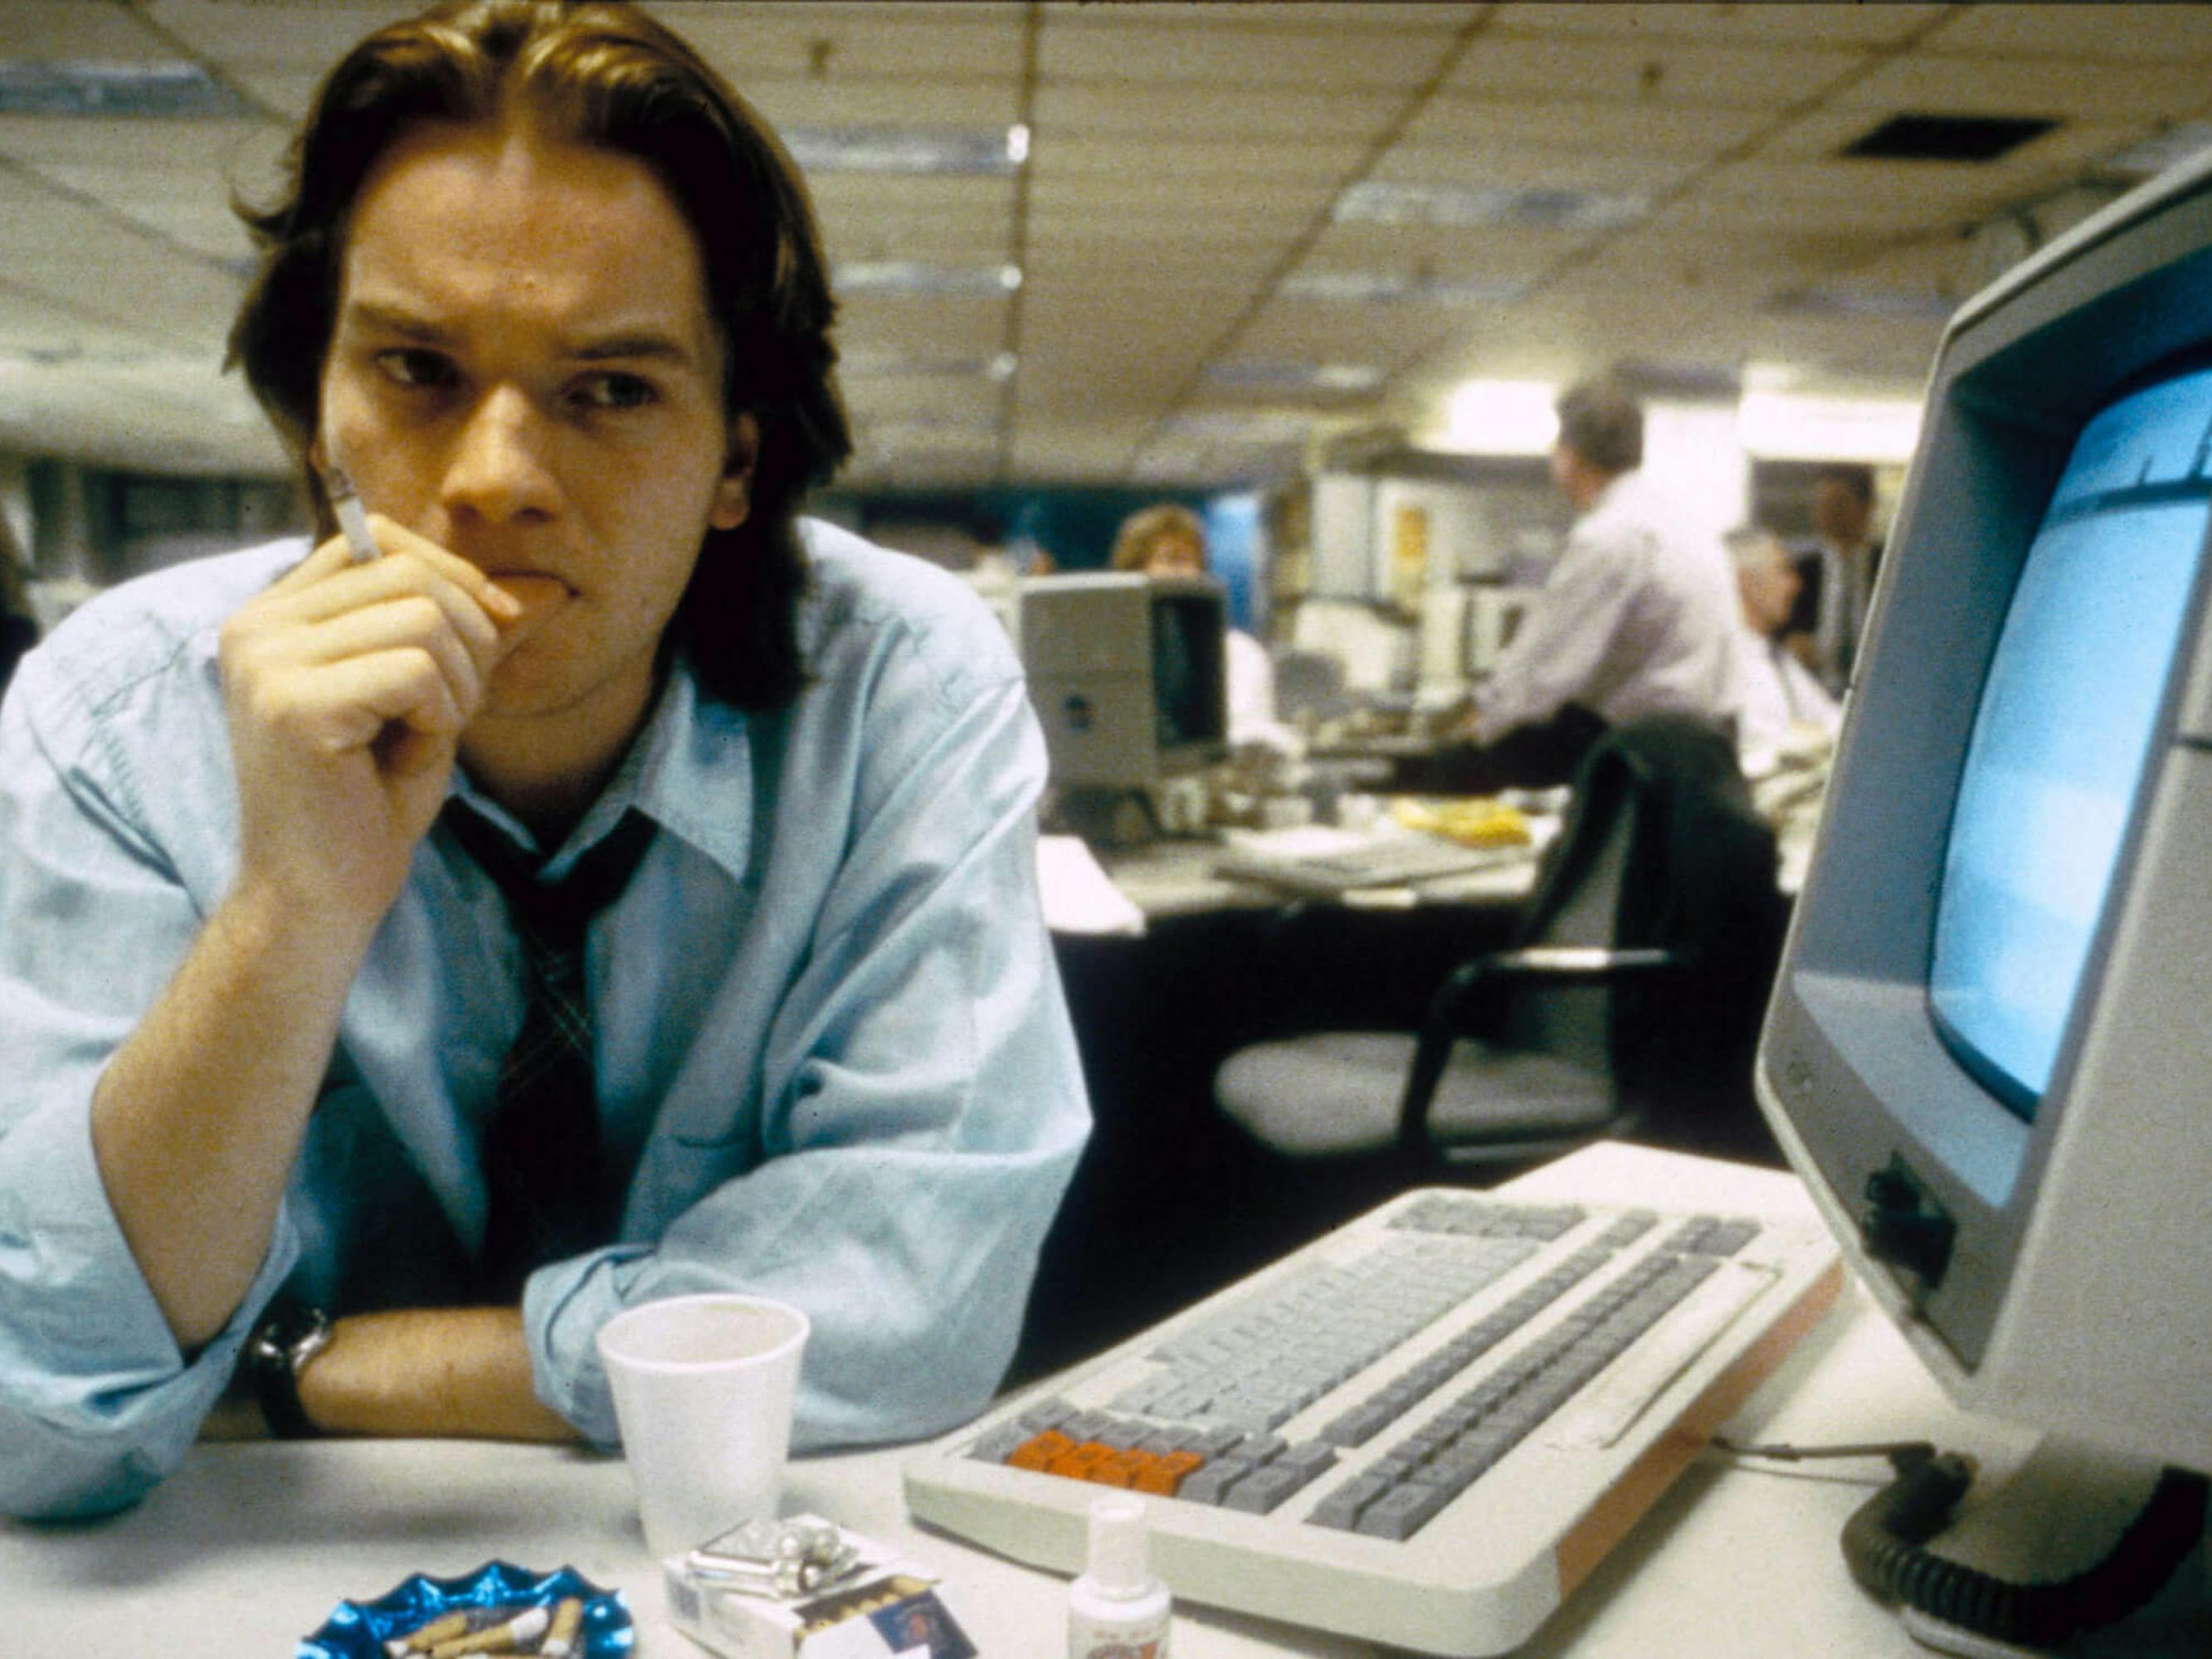 Alex Law (Ewan McGregor) in Shallow Grave sits at a desktop computer and keyboard. He wears a blue buttoned down and dark tie, and looks consternated.